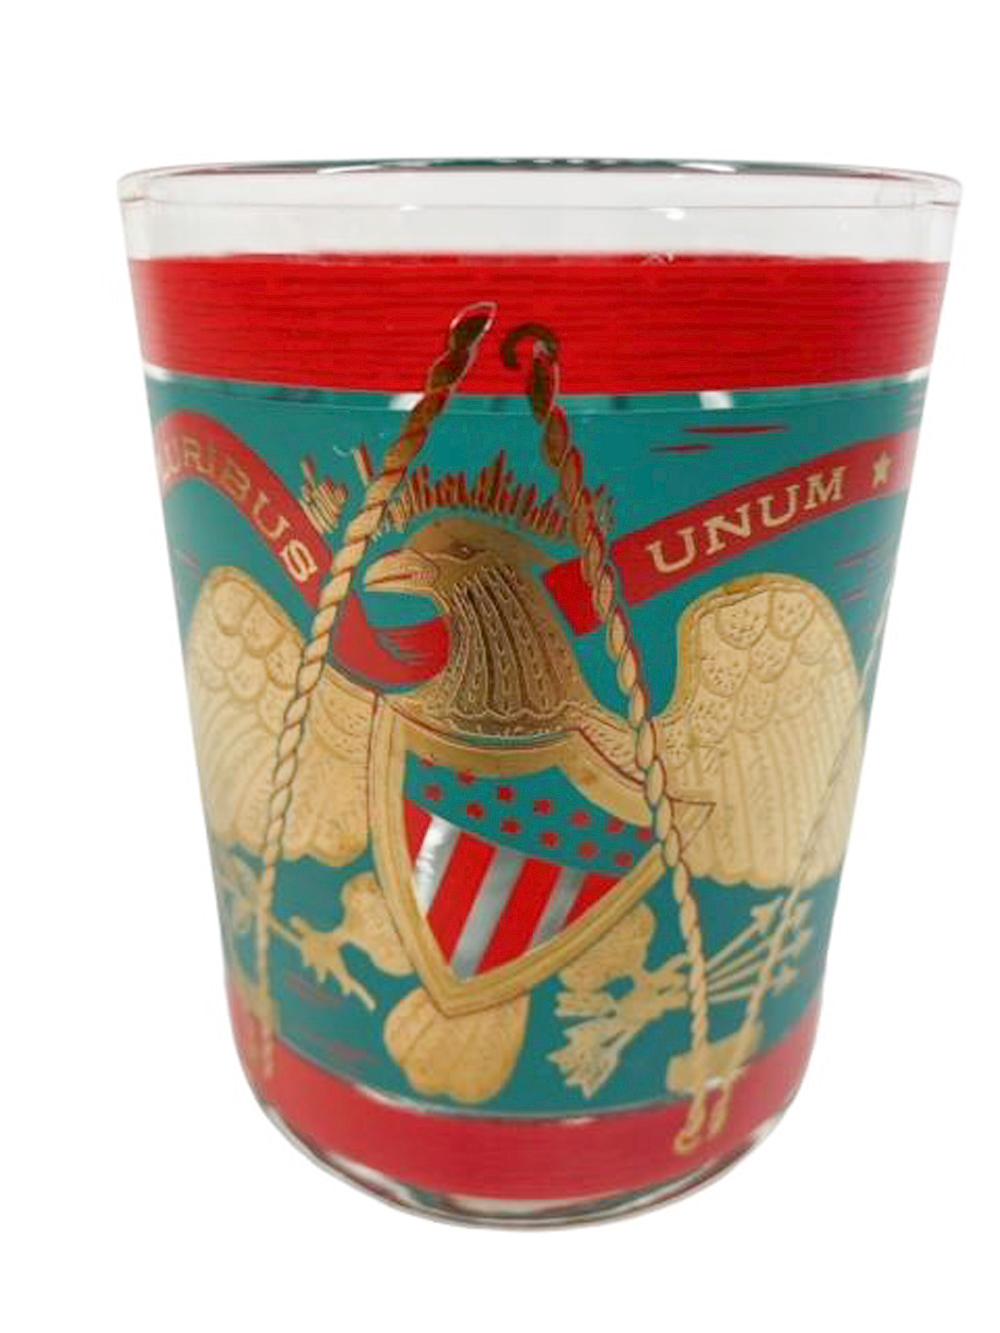 Four vintage rocks glasses by Cera, decorated as a teal and red parade drum with a spread-wing eagle holding a stars and stripes shield on the front and with a shield on the back.